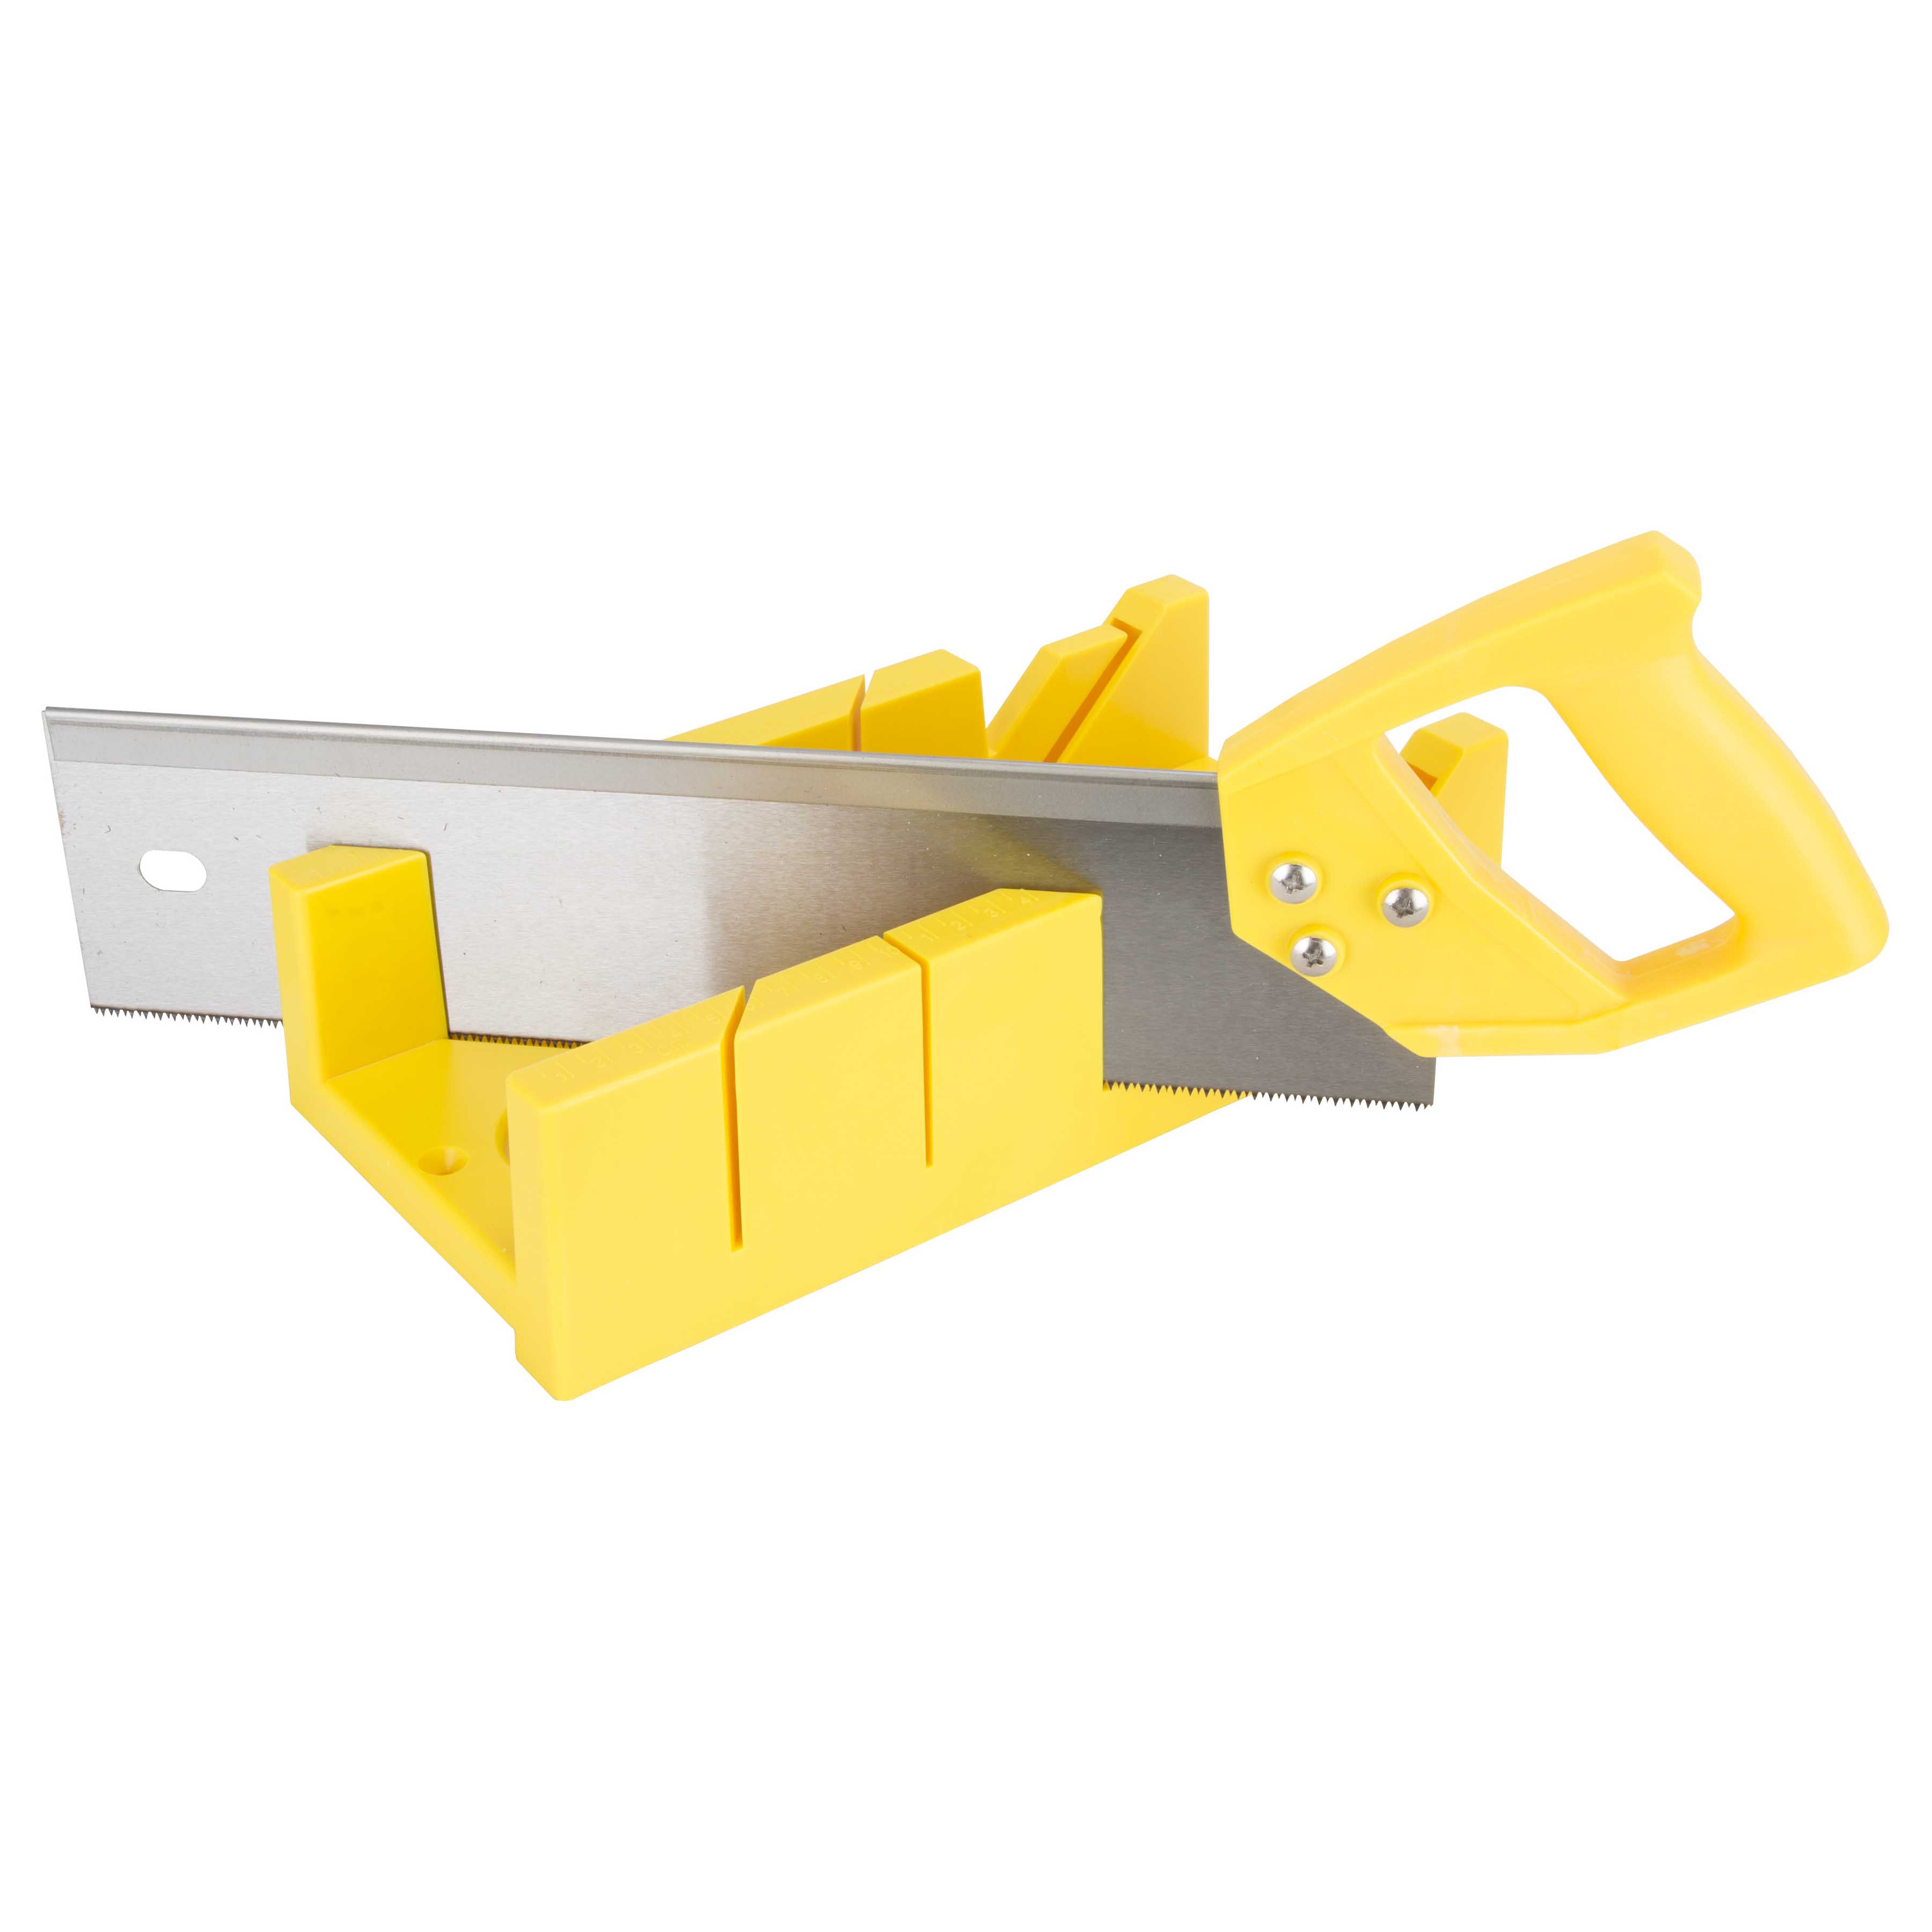 JL42402 Miter Box with Saw, 4 in W Cutting, 2.25 in D Cutting, Plastic, Yellow